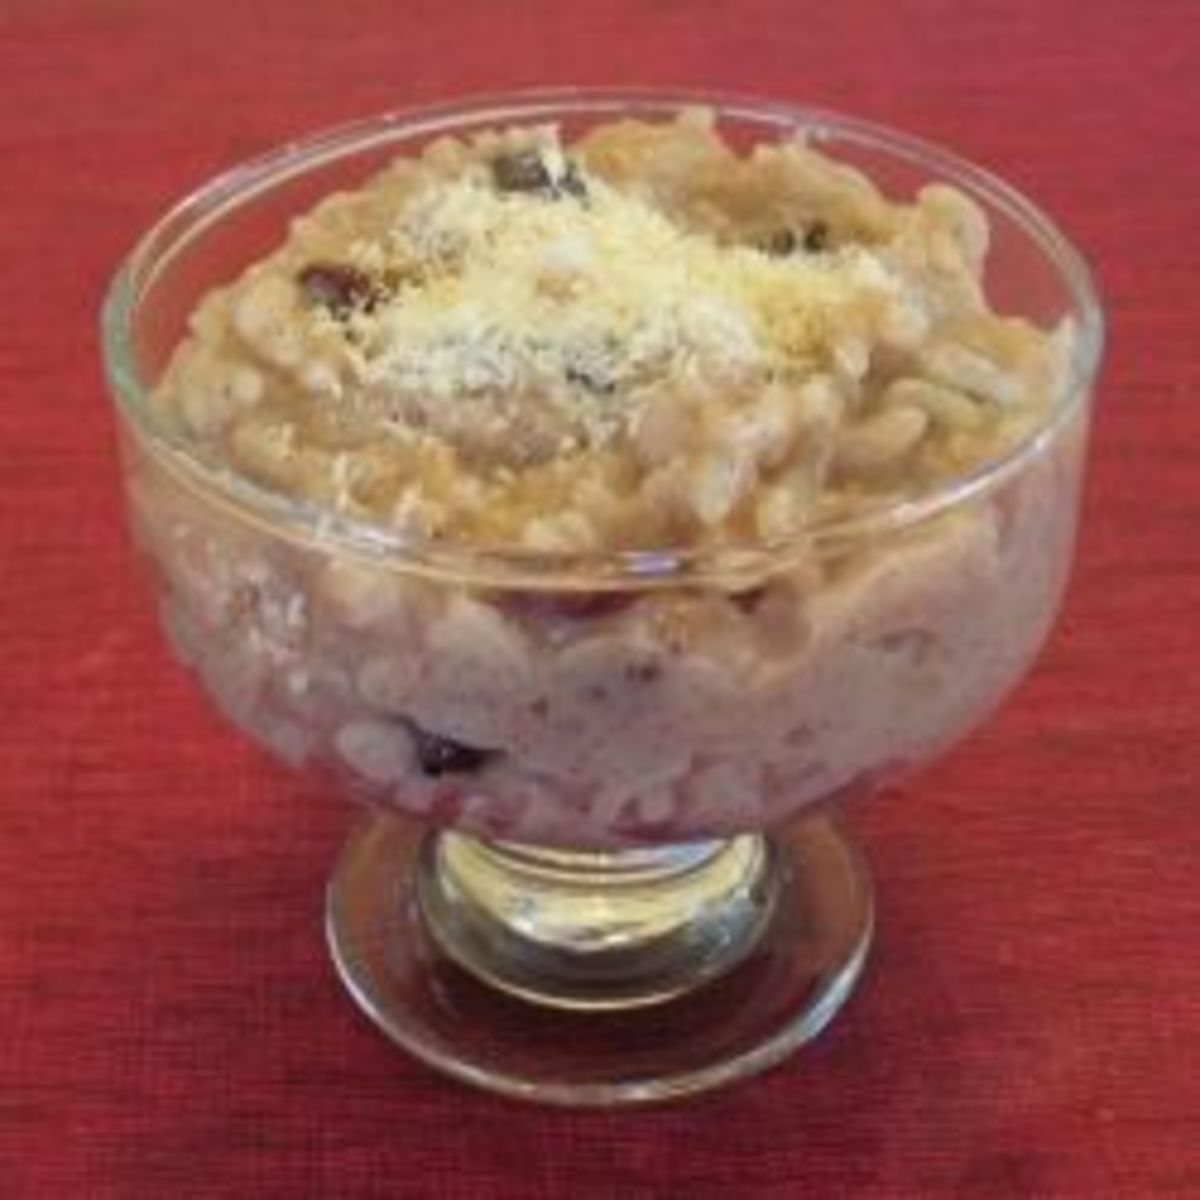 A serving of vegan coconut rice pudding.